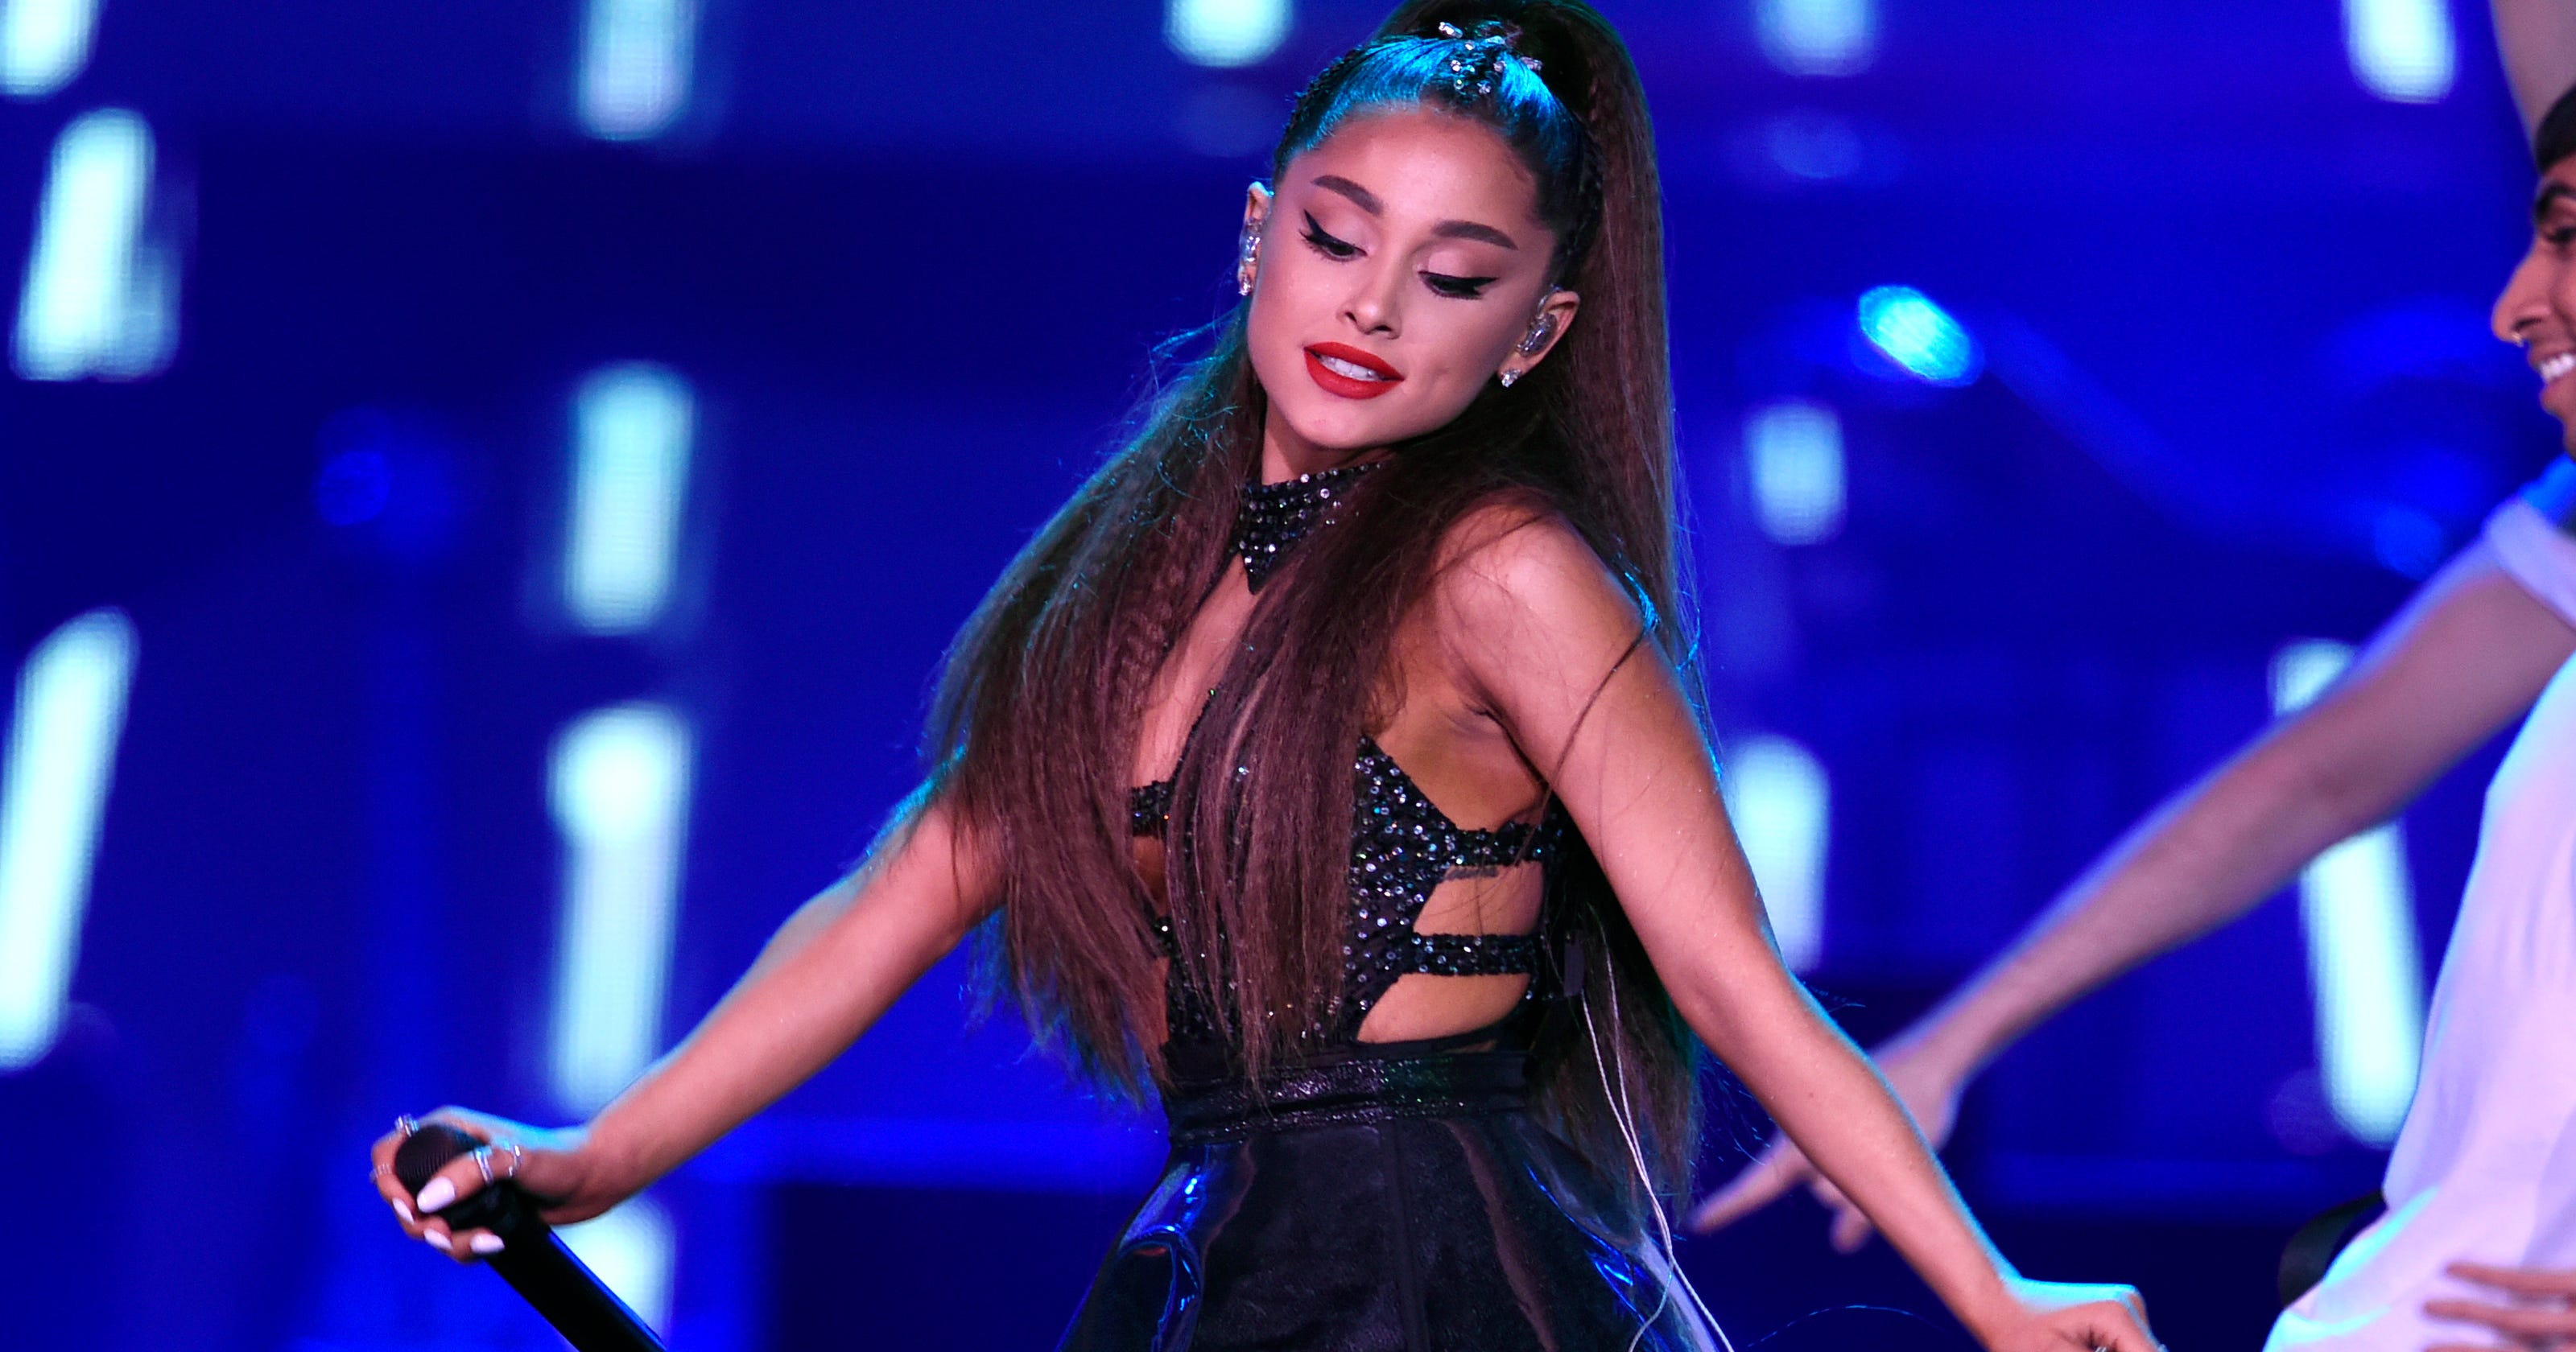 Ariana Grande Hot Naked Lesbian Sex - Ariana Grande bisexual?' That question is problematic to ...